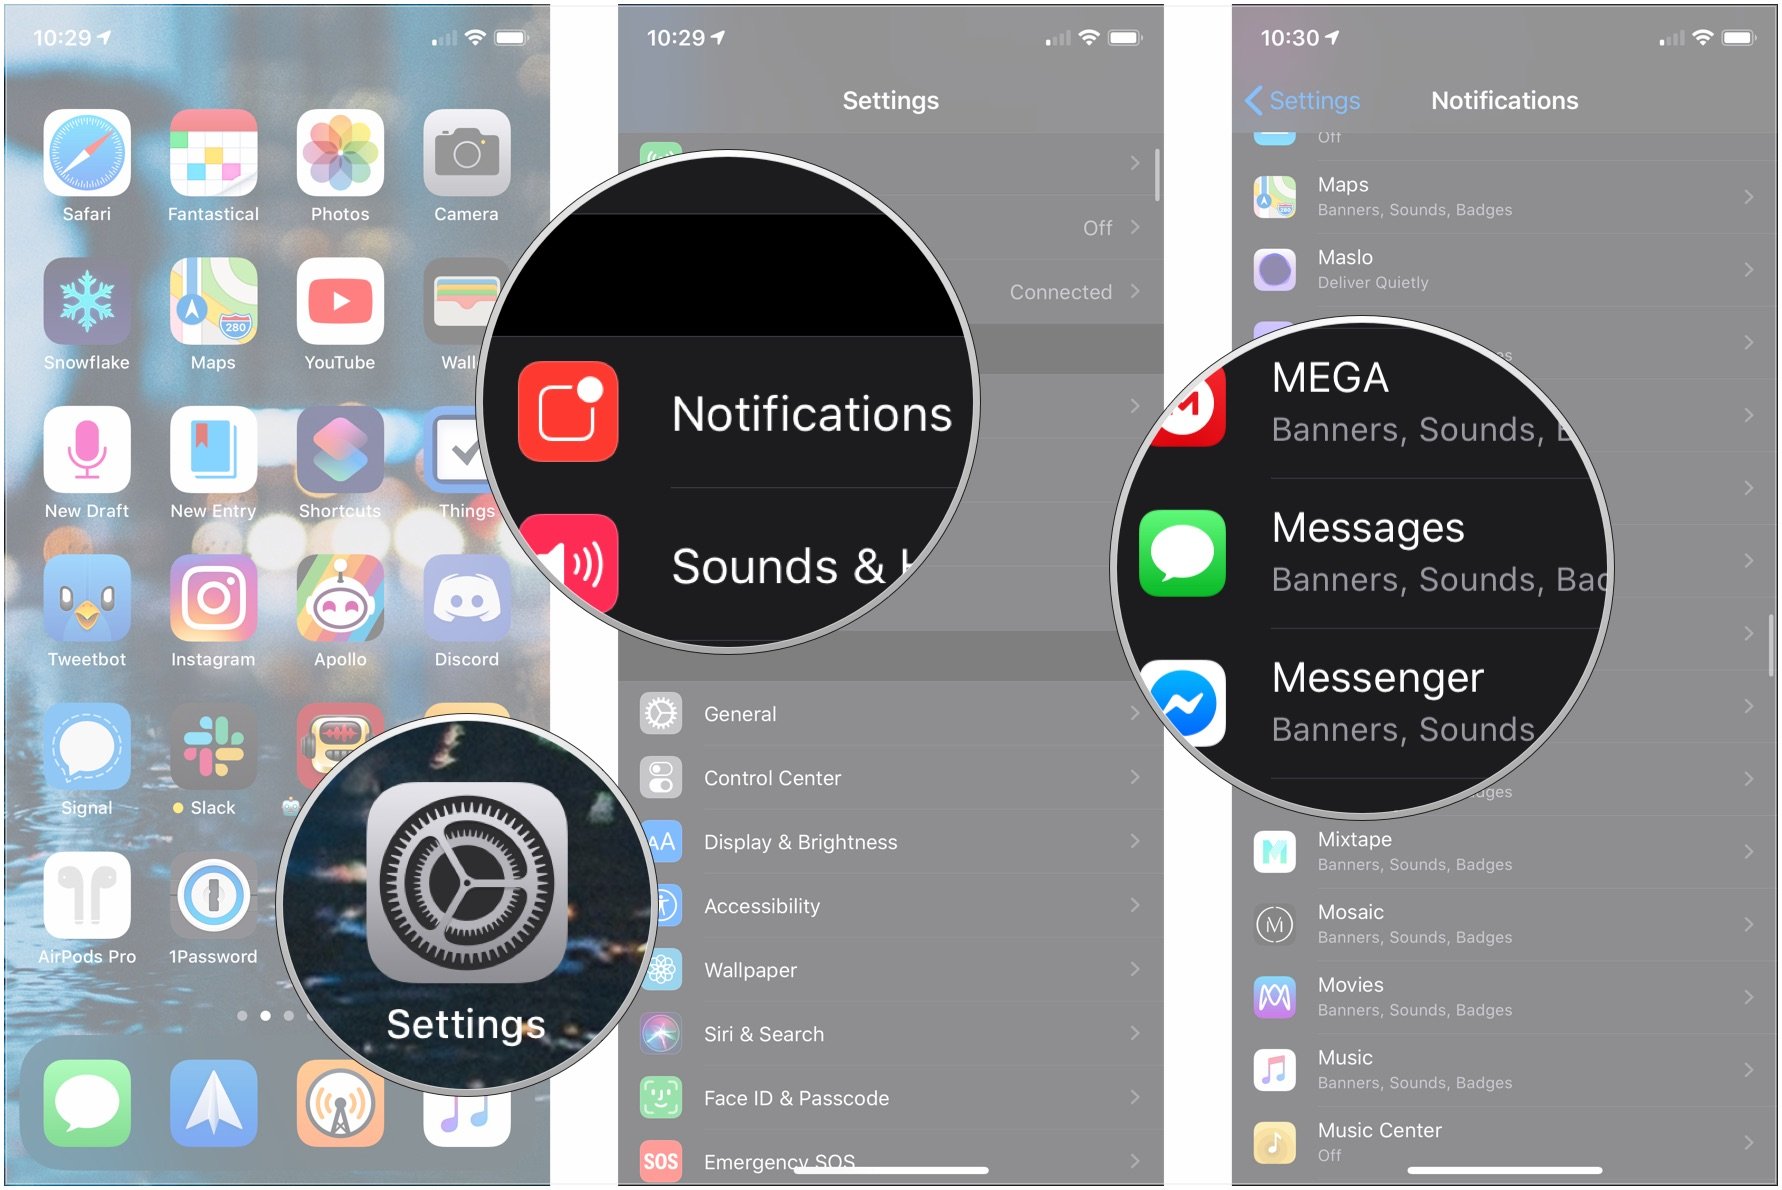 How to manage notifications for the Lock screen: Open Settings, tap Notifications, tap app